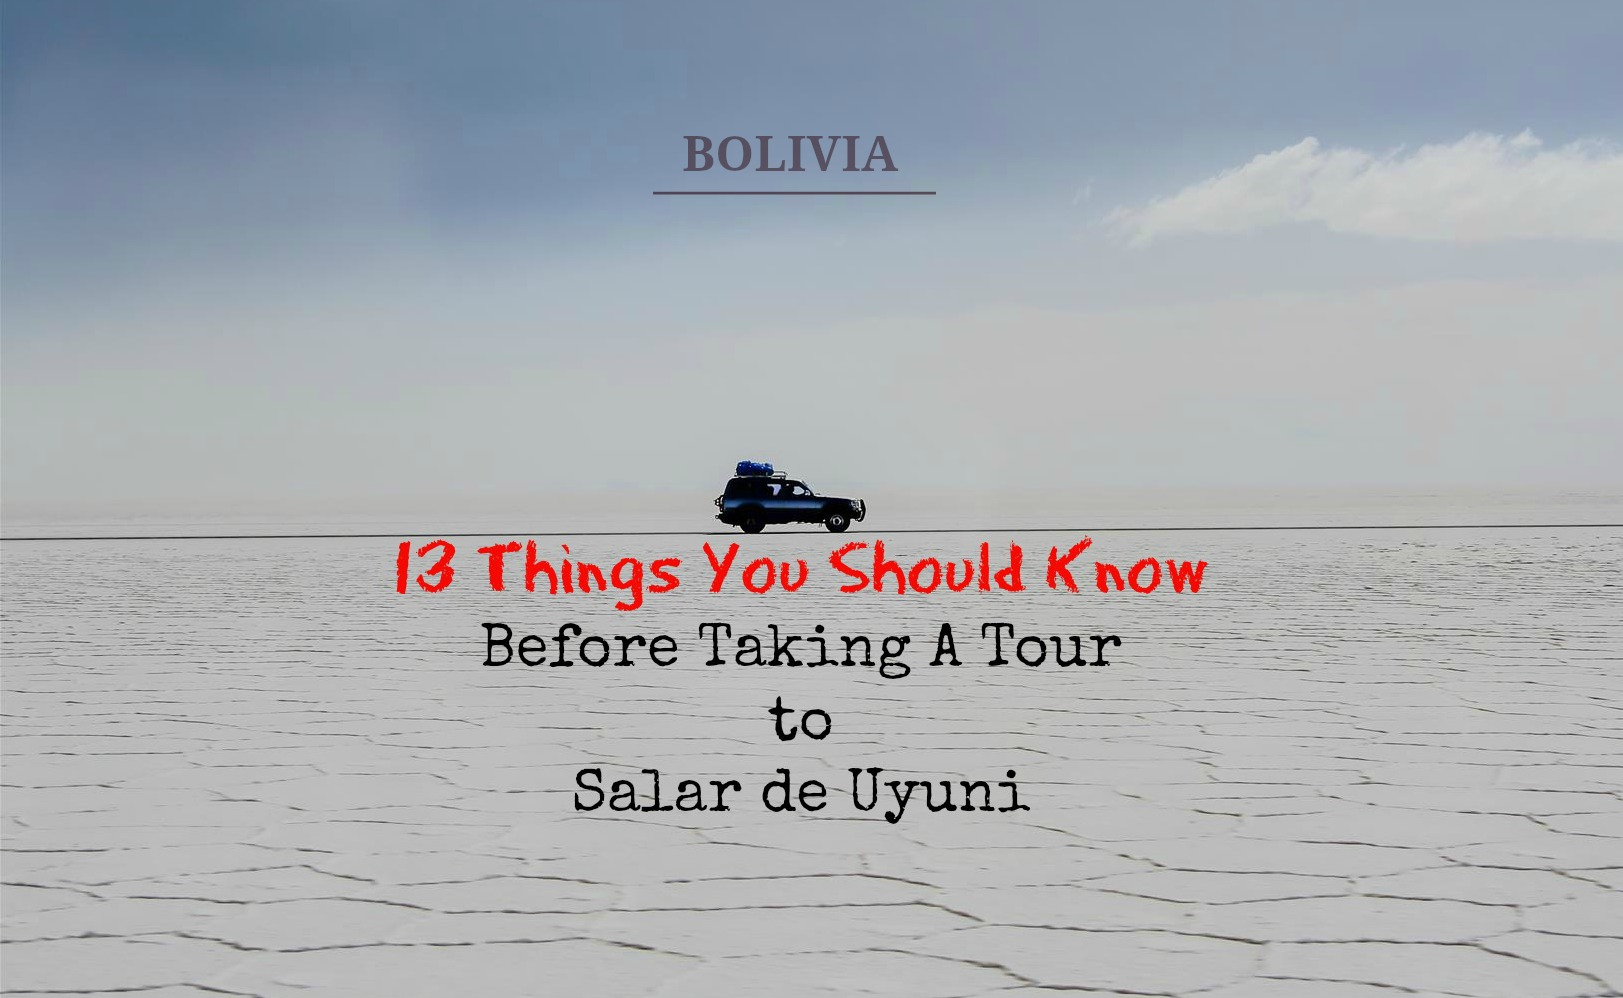 13 things you should know before taking a tour to Salar de Uyuni